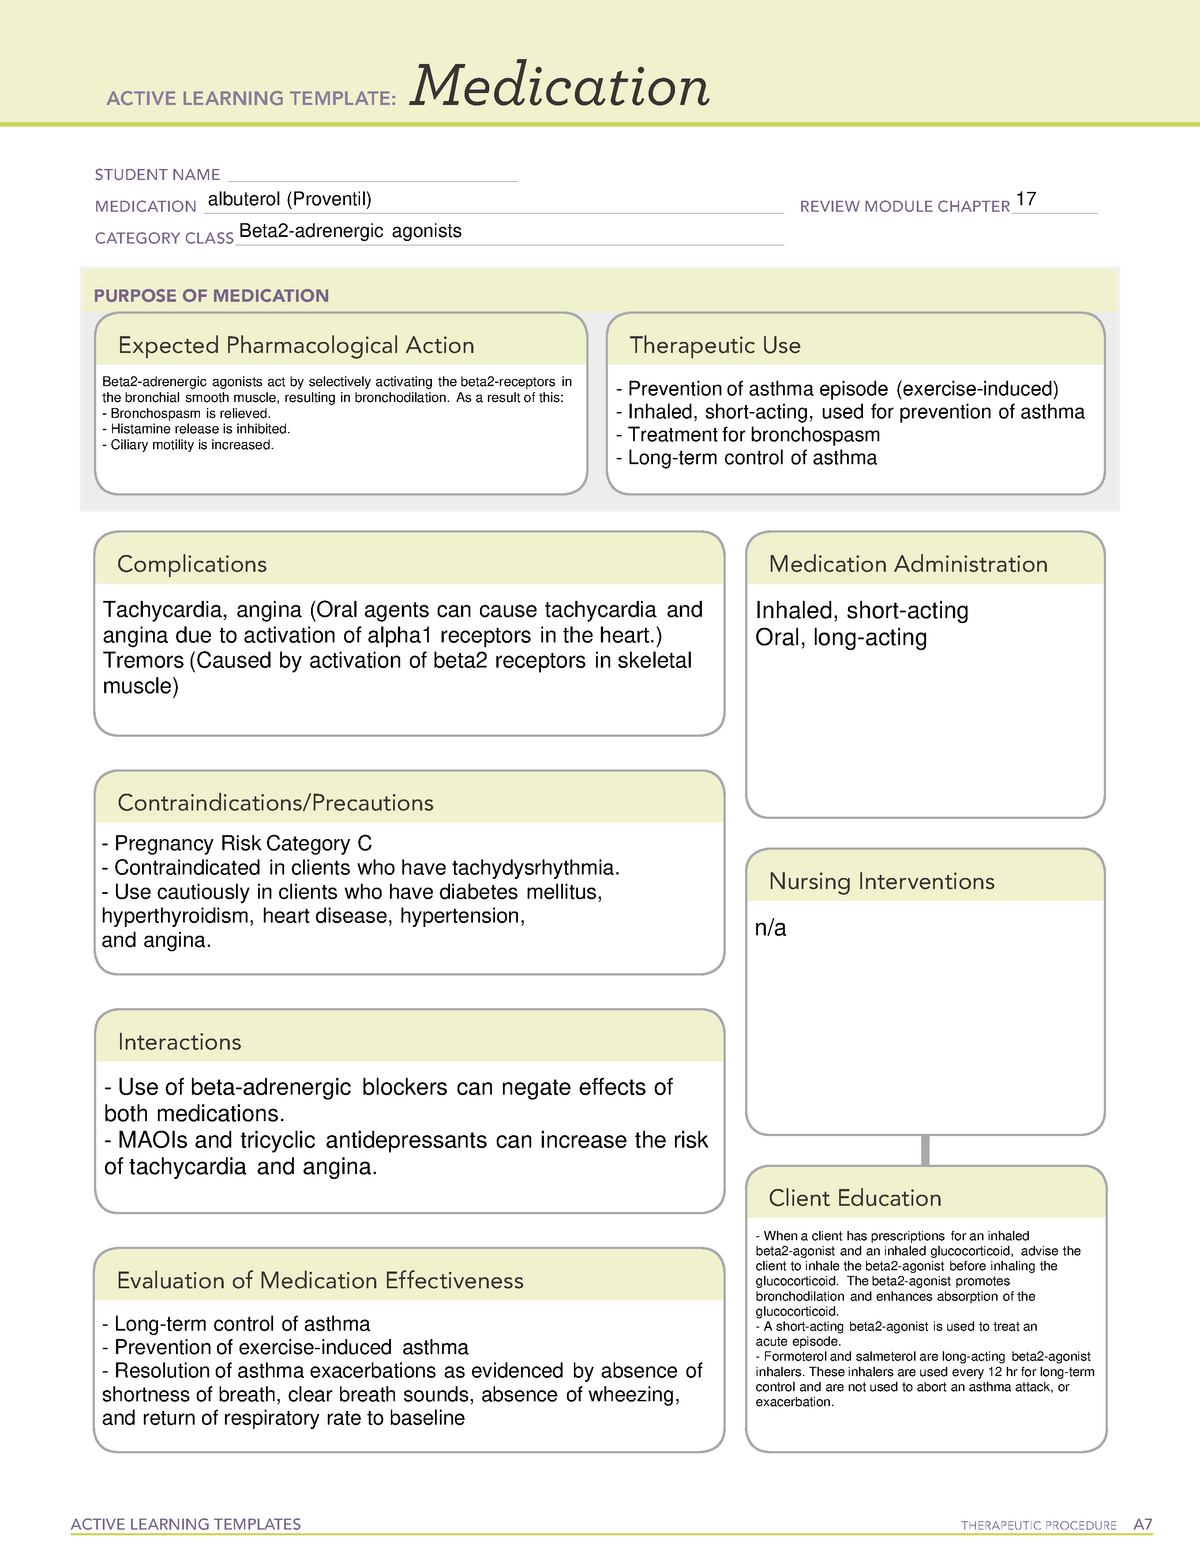 active-learning-template-nursing-skill